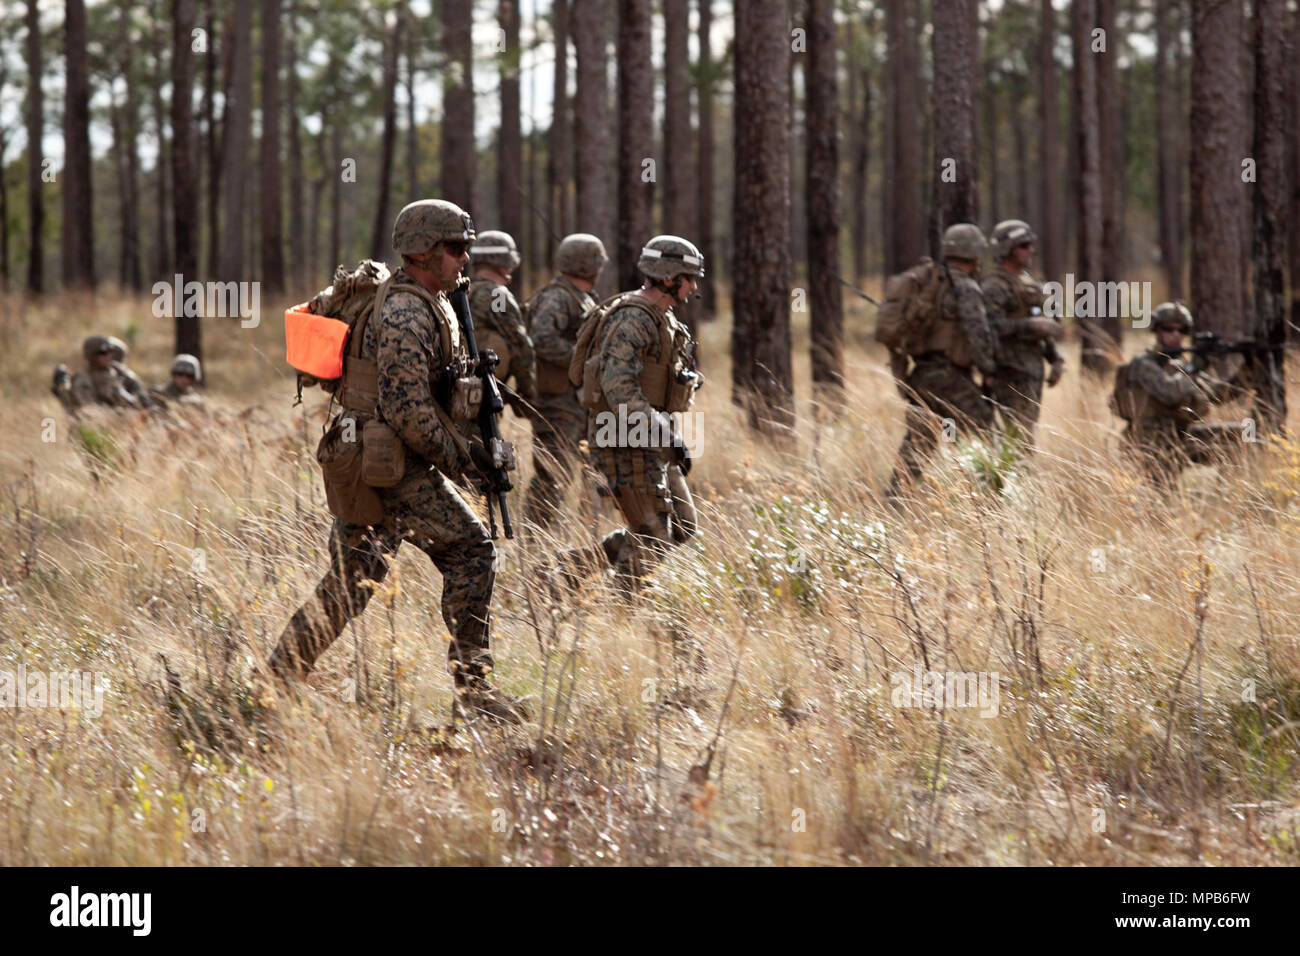 U.S. Marines attached to Advanced Infantry Training Battalion, School of Infantry-East (SOI-E), conduct buddy pair fire and maneuver movements during a combined arms exercise at Camp Lejeune, N.C., April 7, 2017. The mission of SOI-E is to train entry-level and advanced level Marines in the skills required of an Infantry Marine for the operating forces. Stock Photo